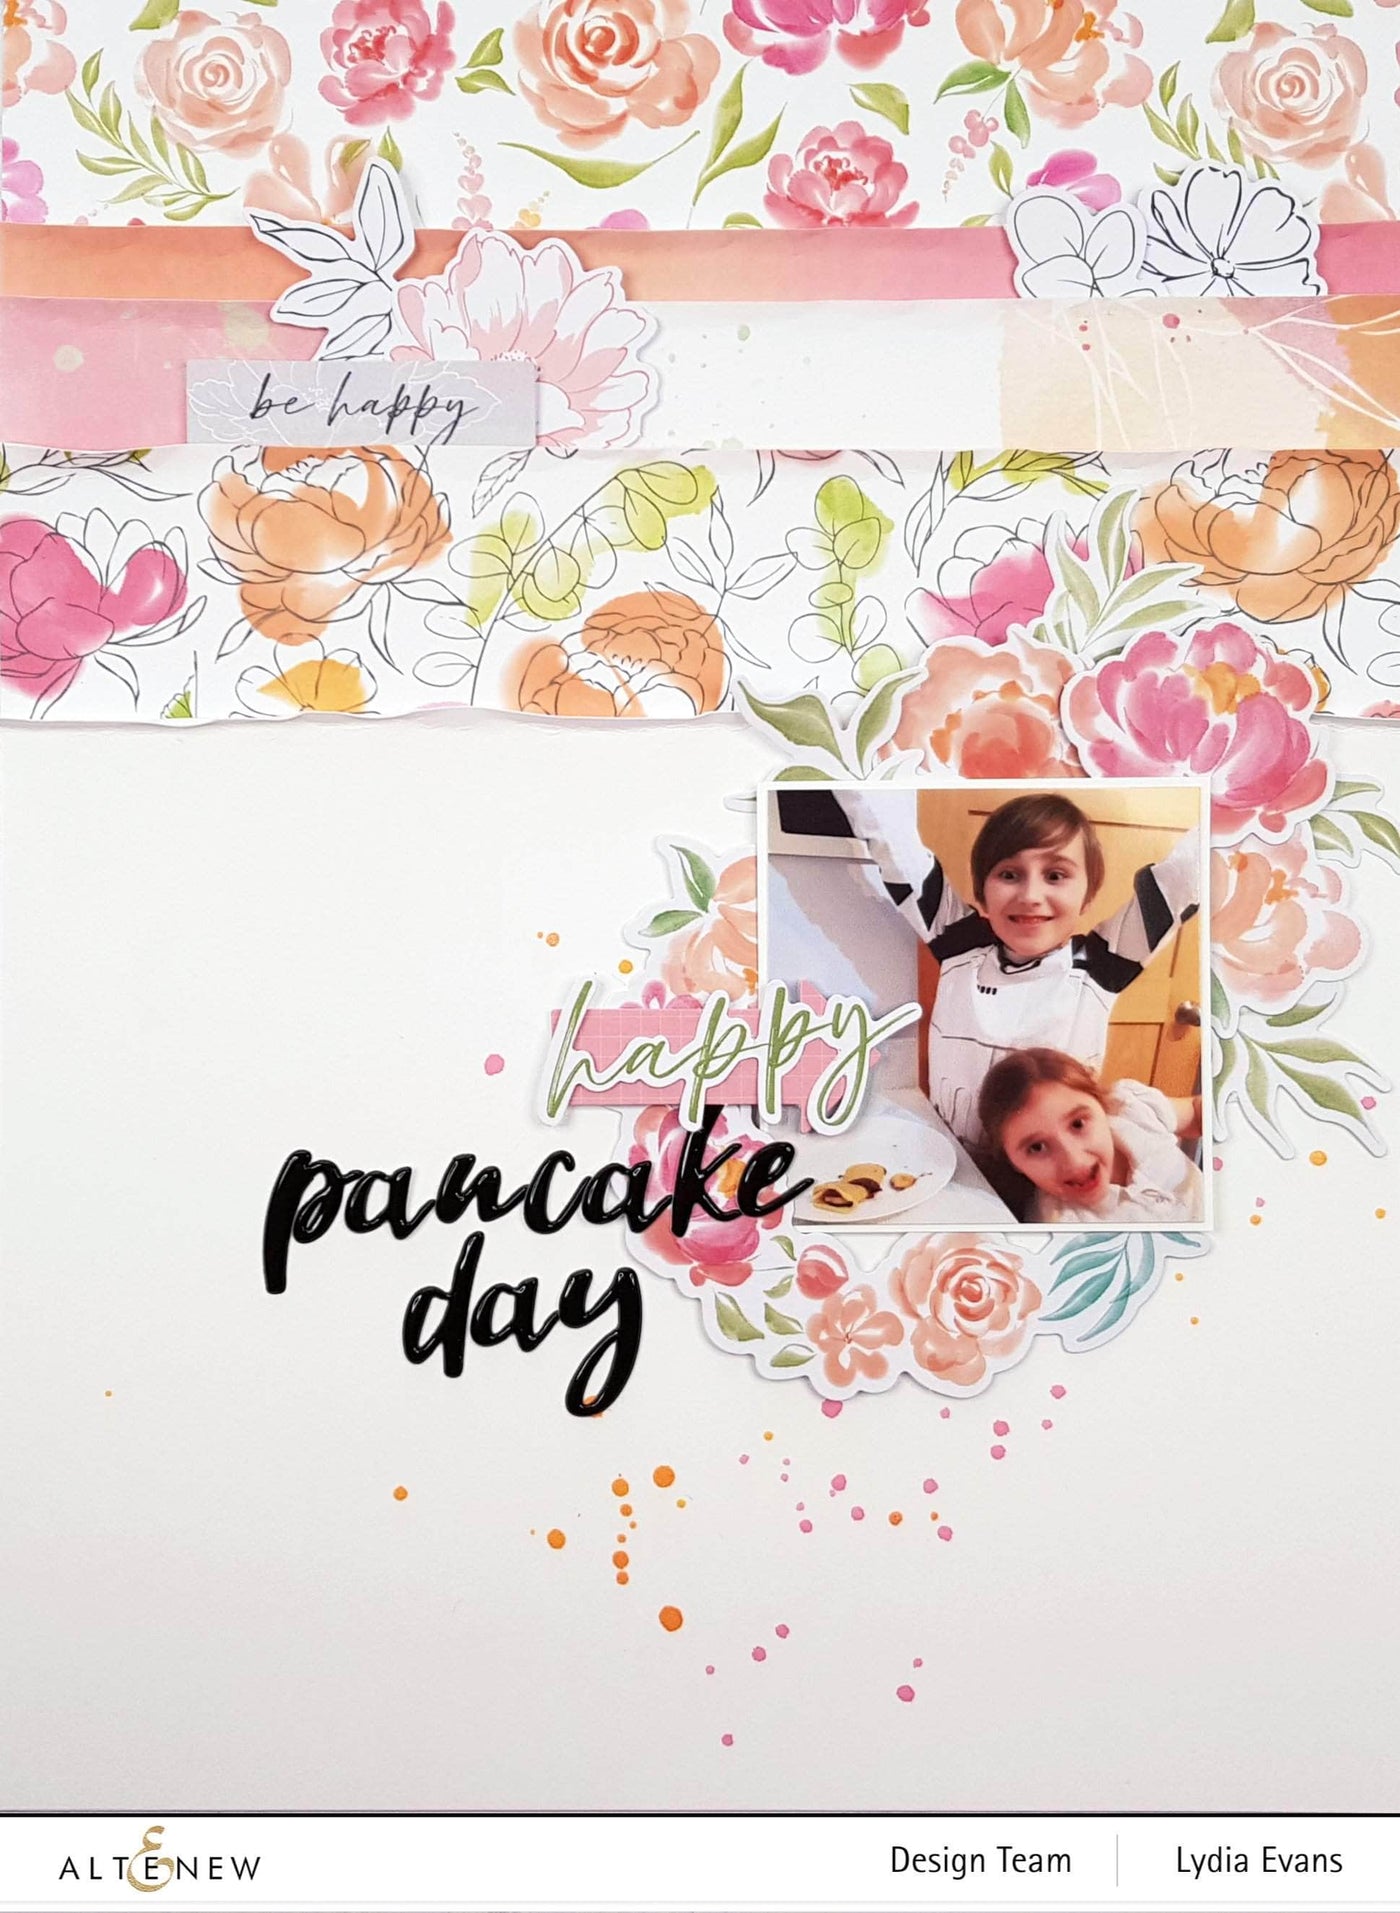 Pattern Paper Celebrate: Everyday Moments 12x12 Paper Pack (25 sheets)